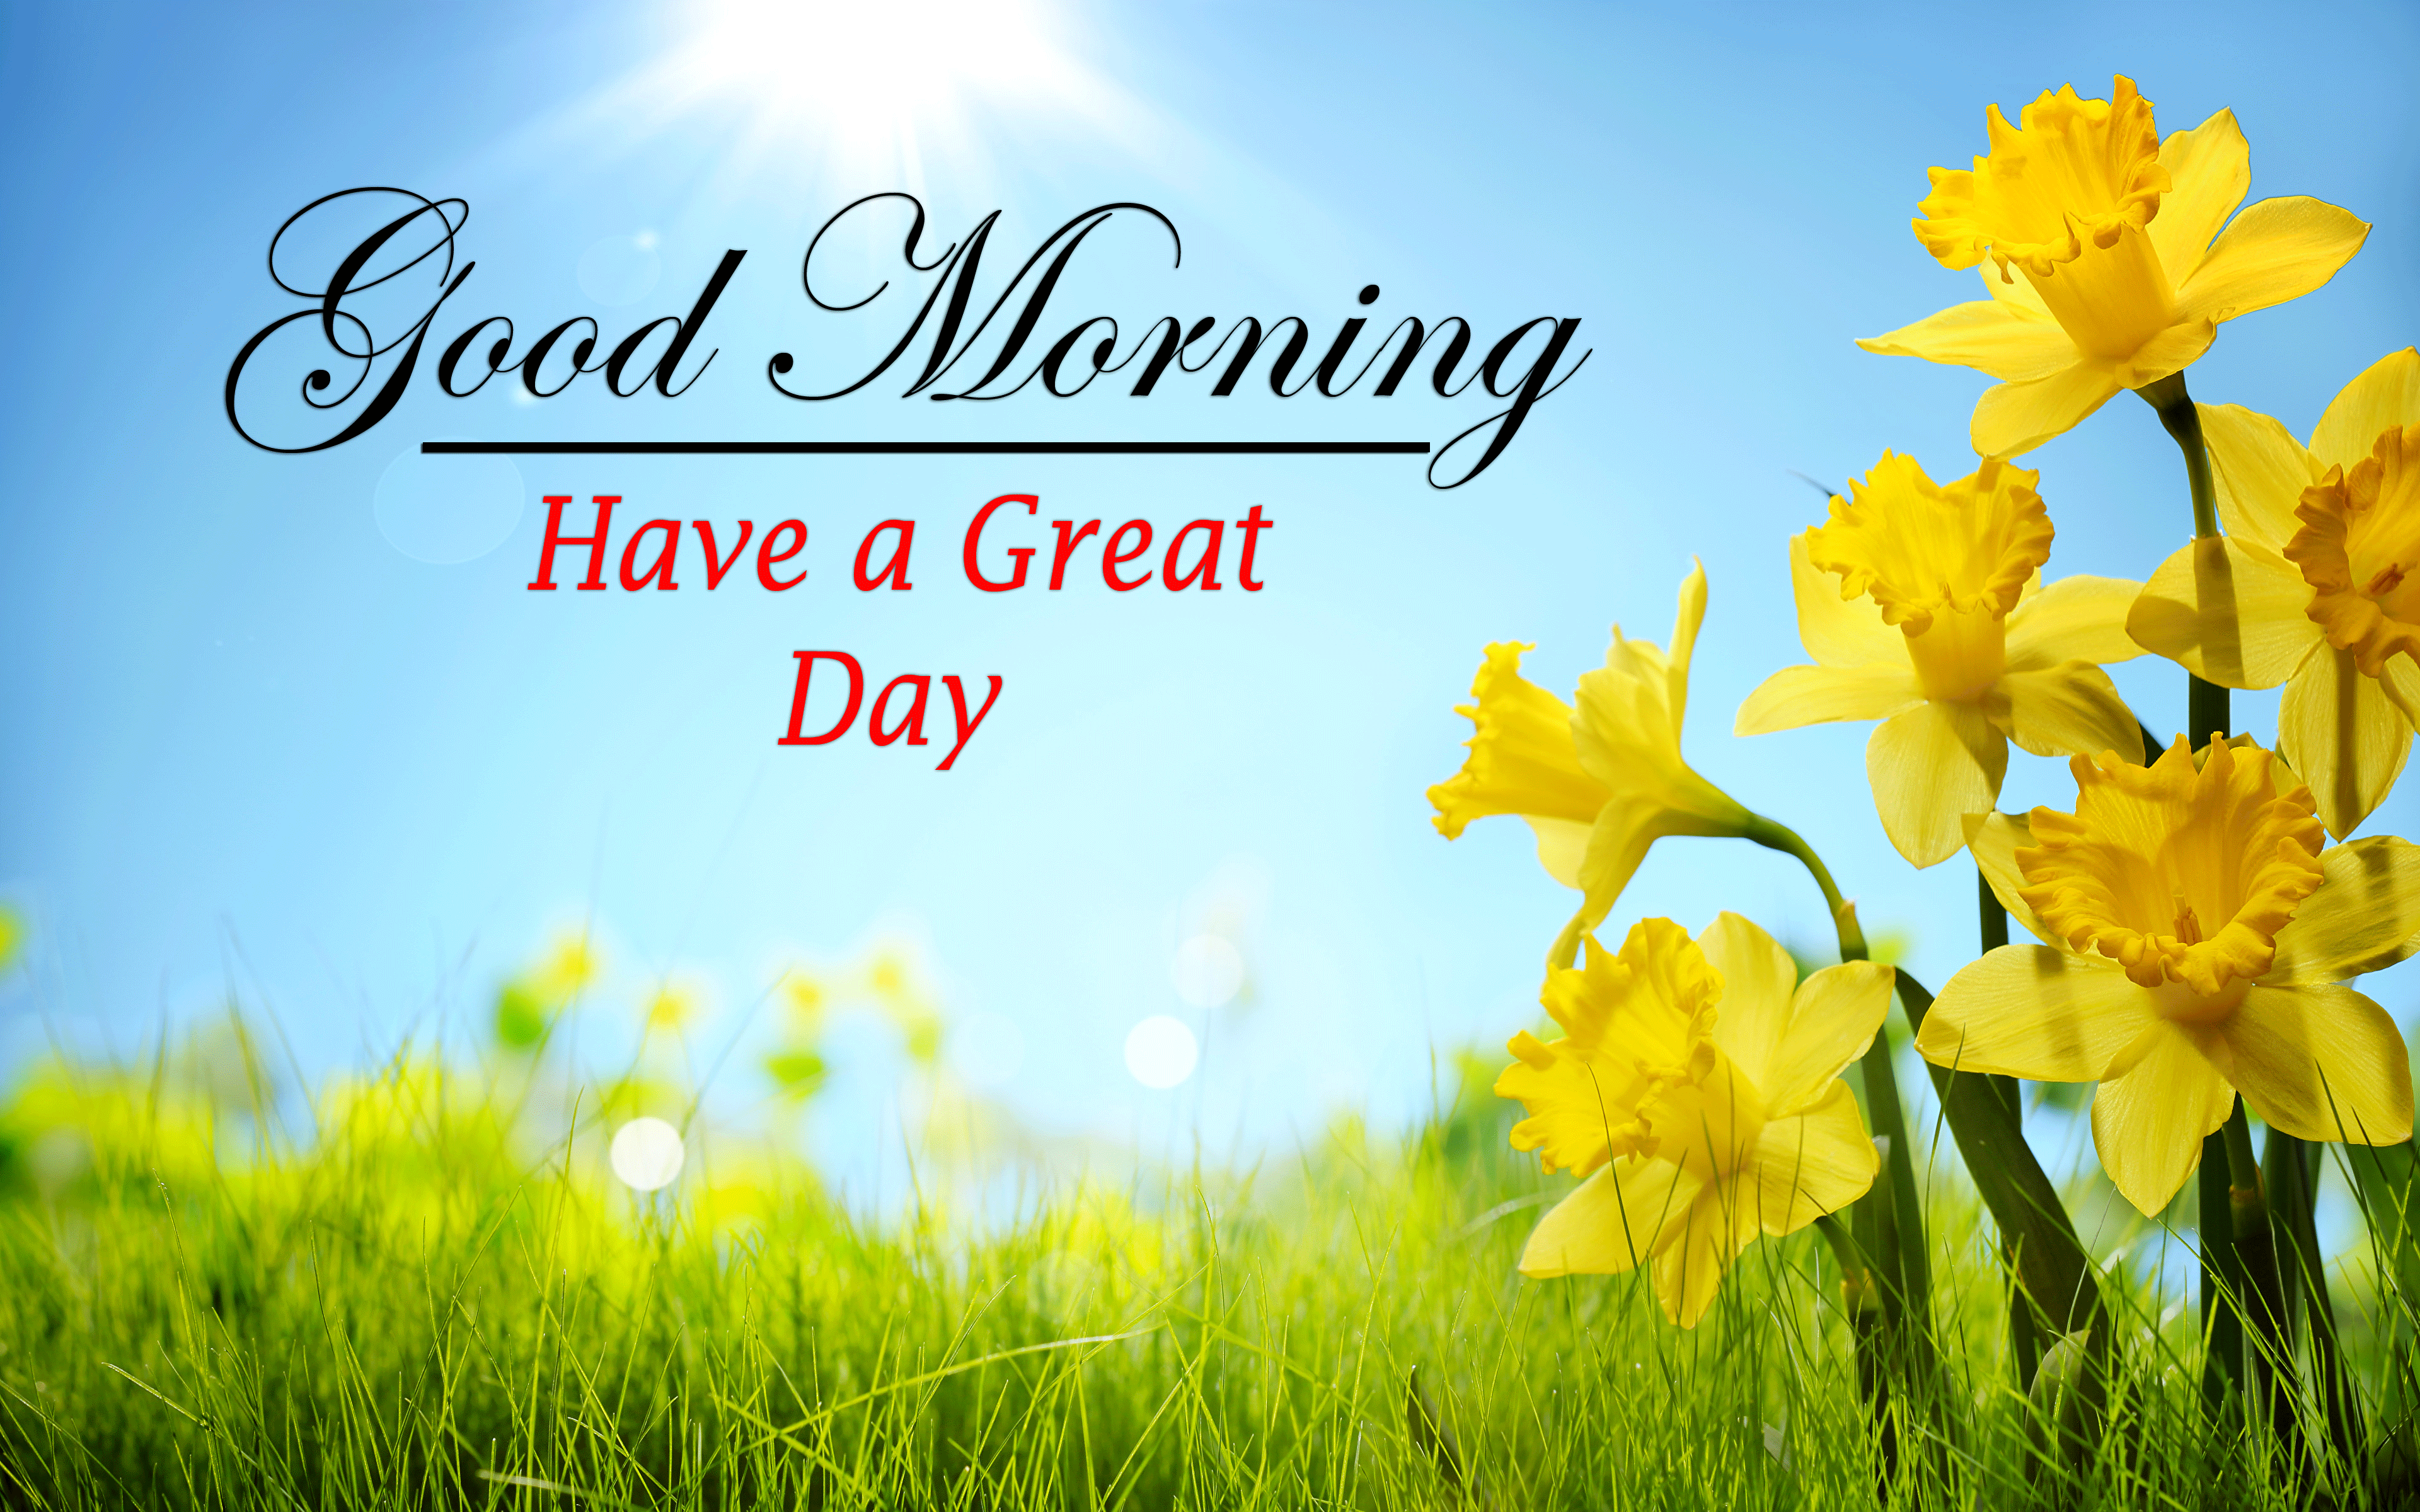 Good Morning Images photo free hd download